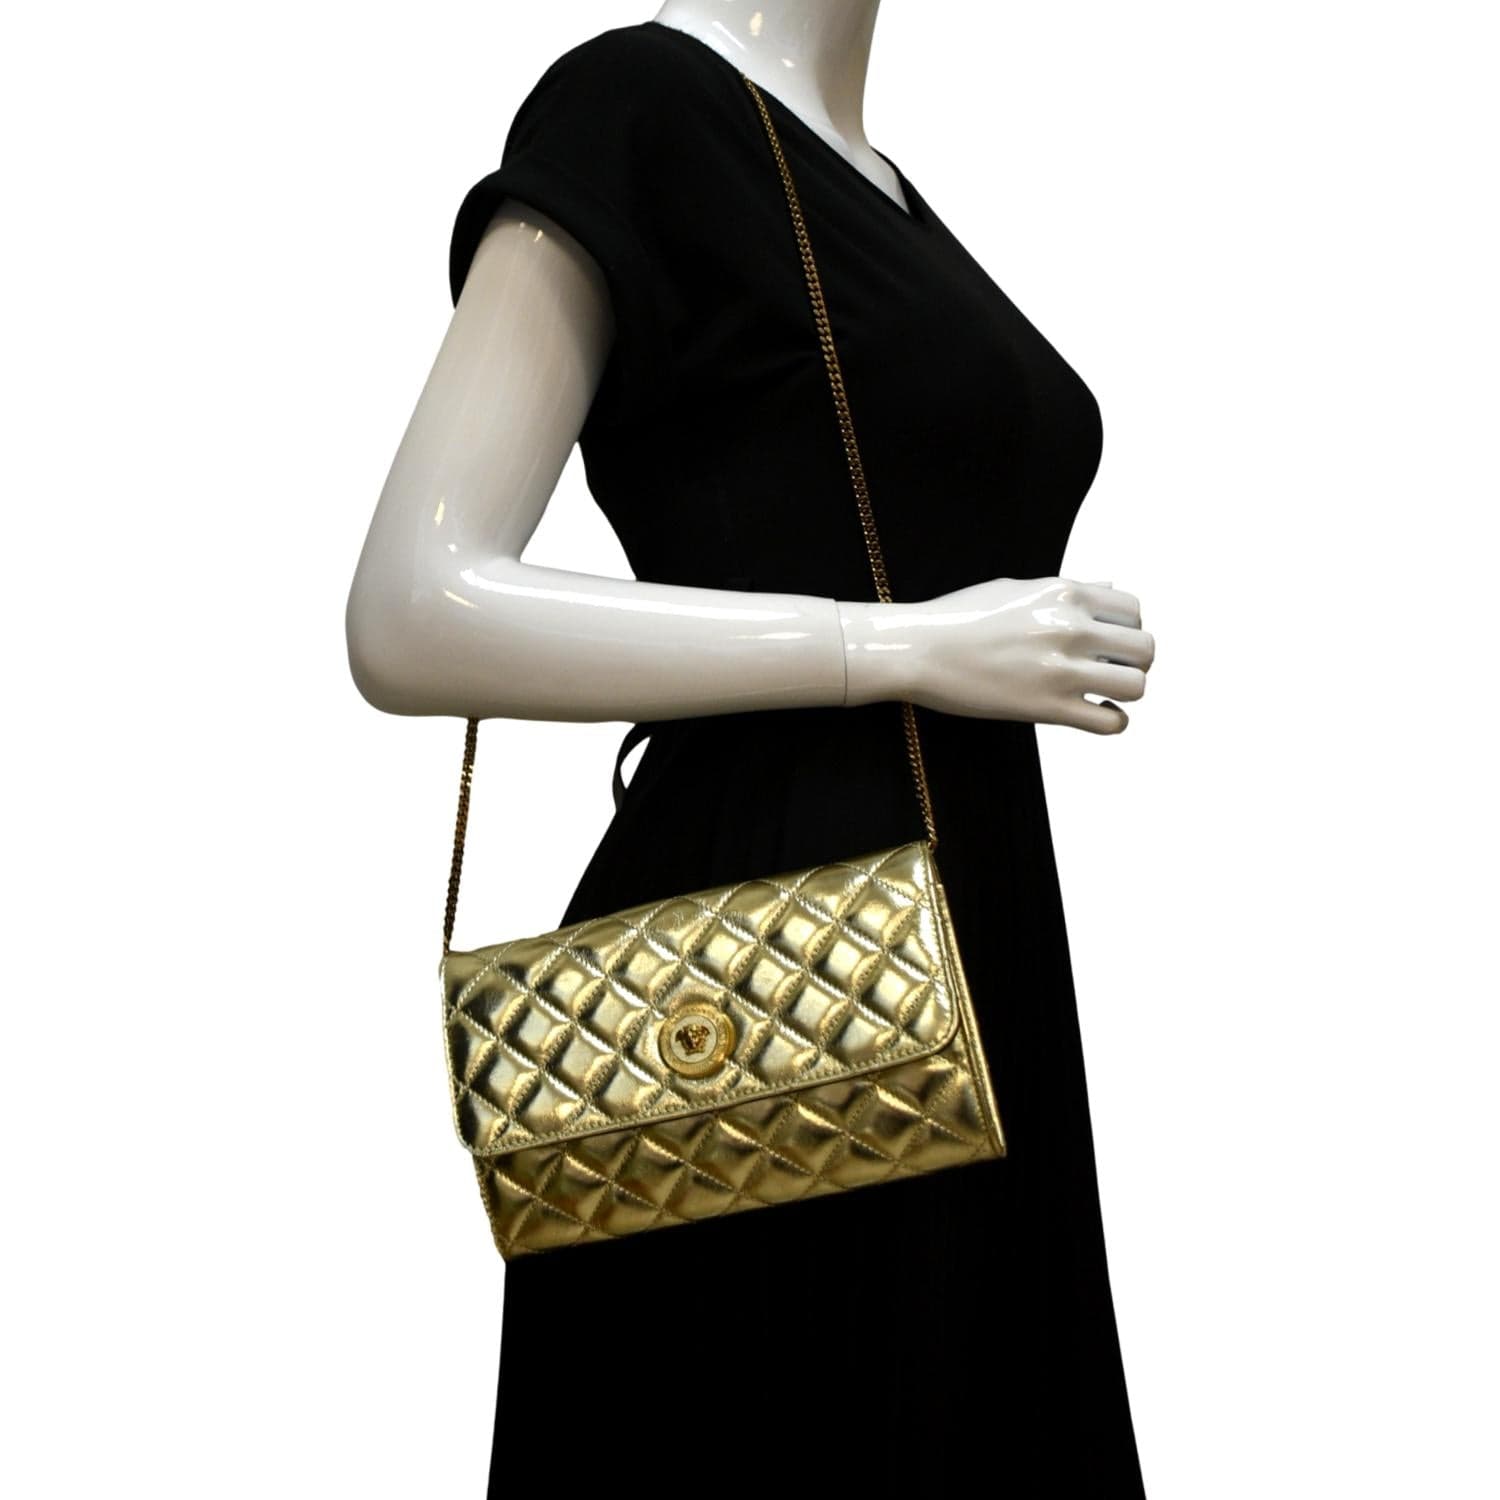 Gold Metallic Quilted Chain Cross Body Bag